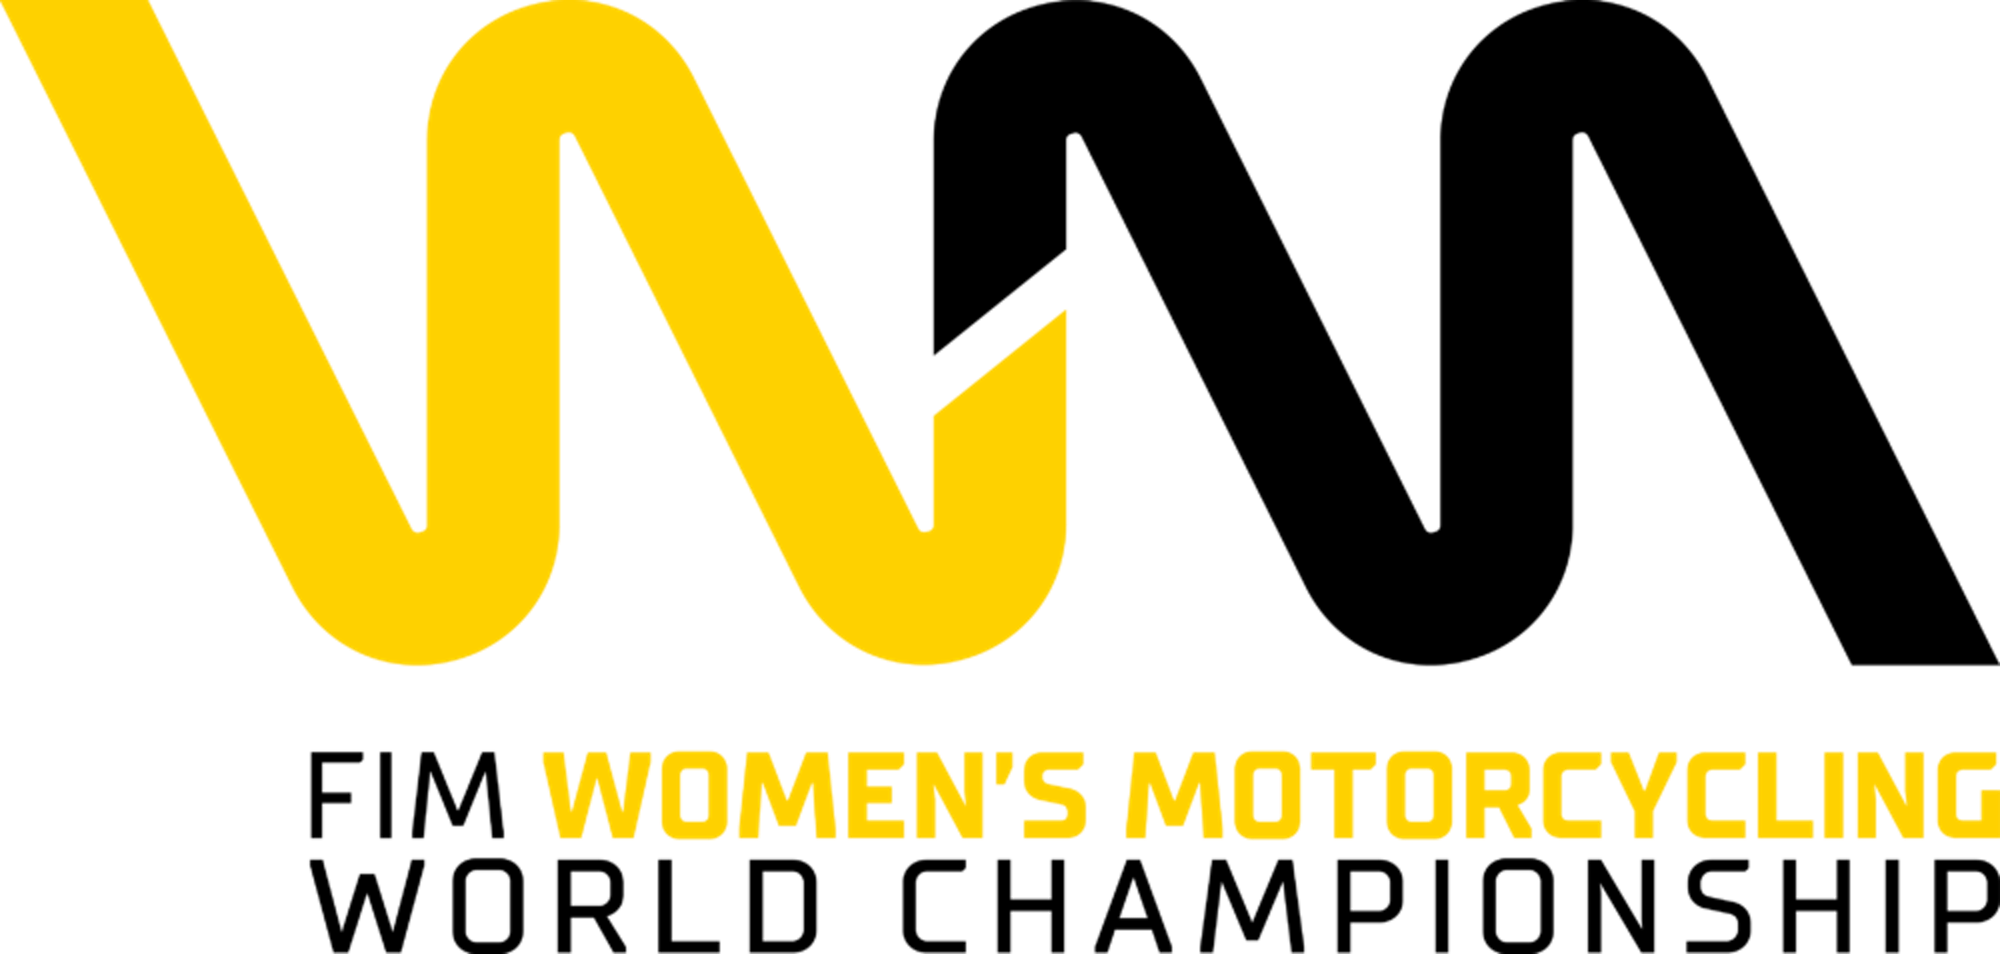 the all-new Women's Motorcycling World Championship logo. Media sourced from CycleNews.